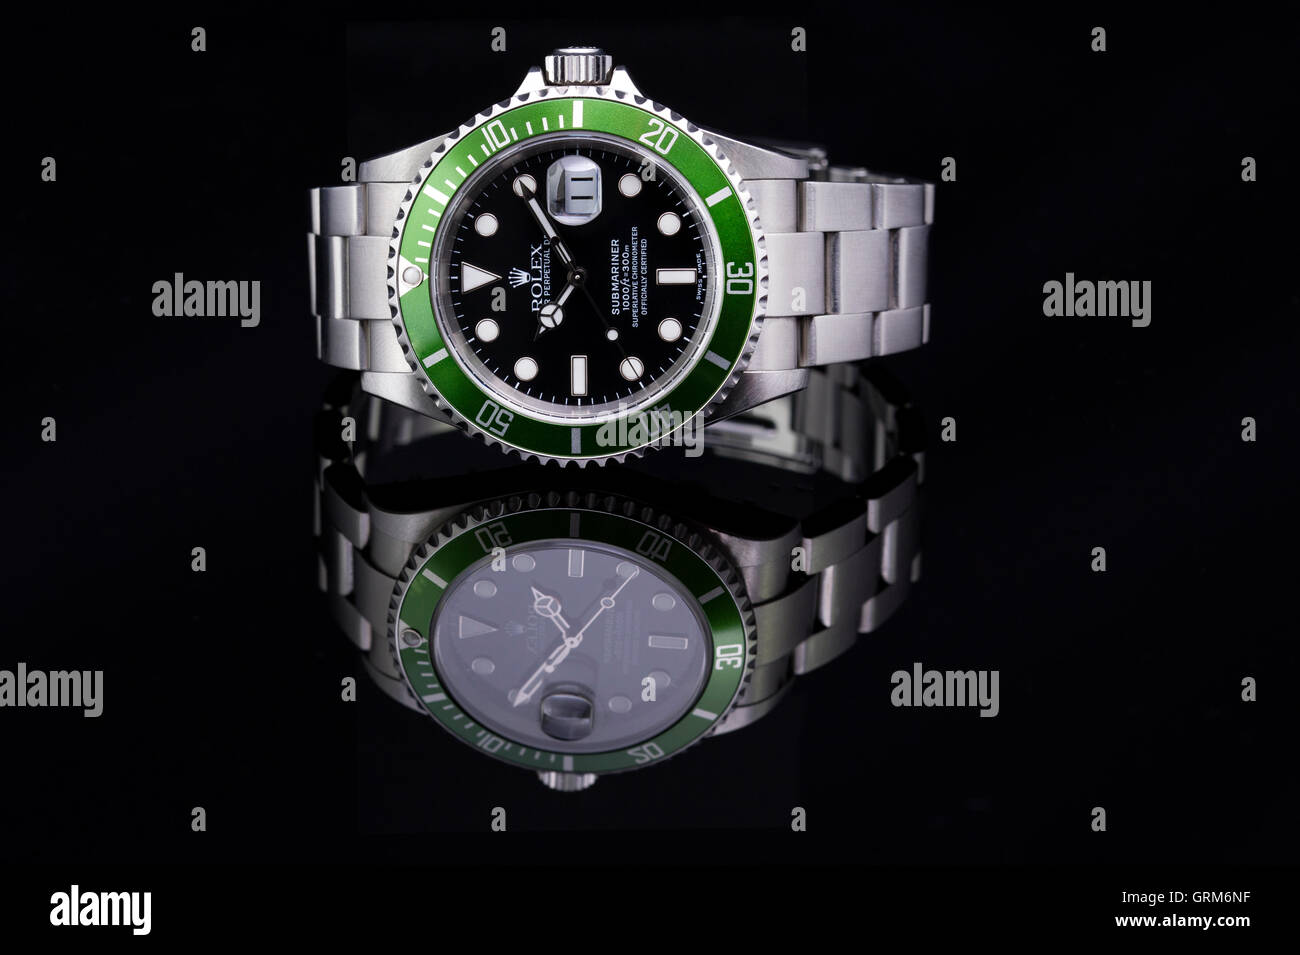 Green Rolex Submariner watch reflected on black background Stock Photo